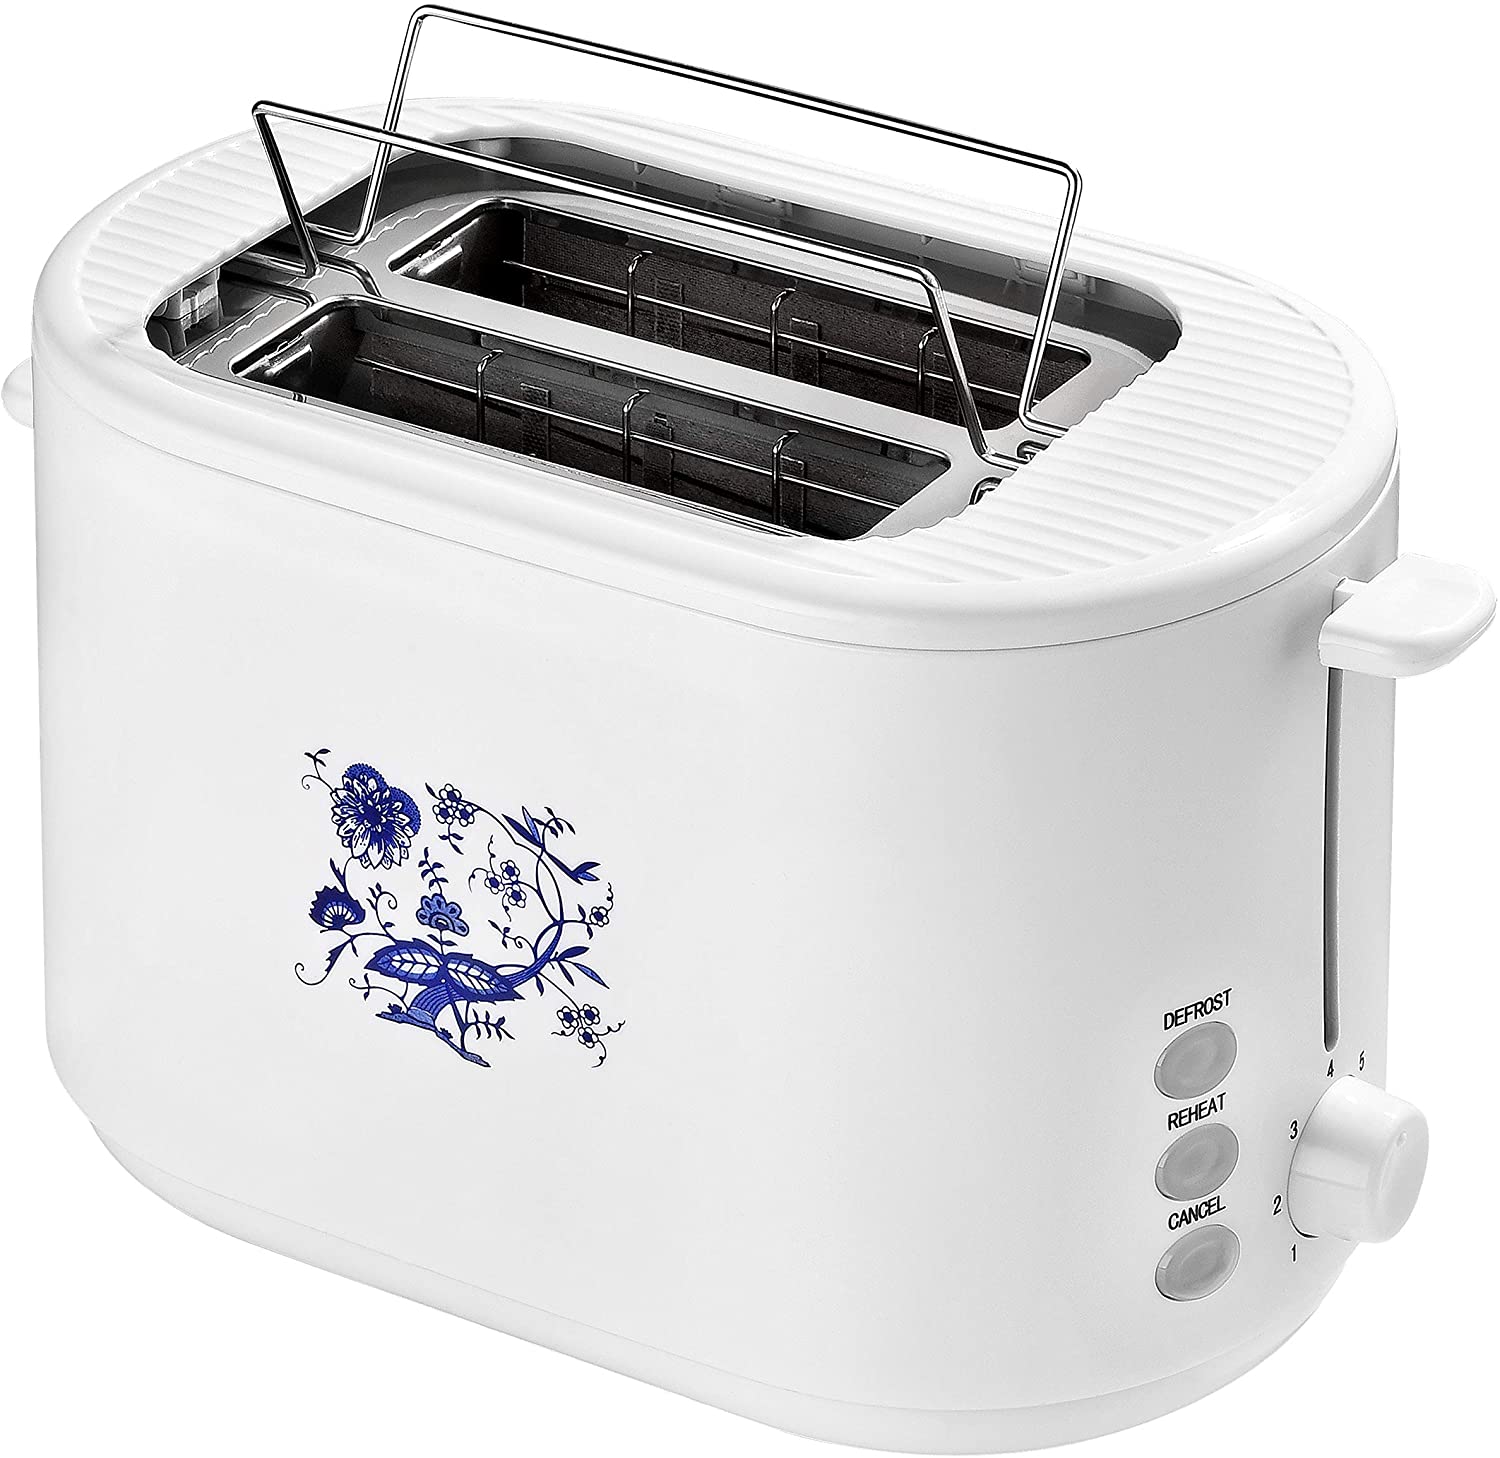 Efbe-Schott SC to 1080.1 Z Unisex Automatic Toaster White with Blue Onion Pattern Design, 000